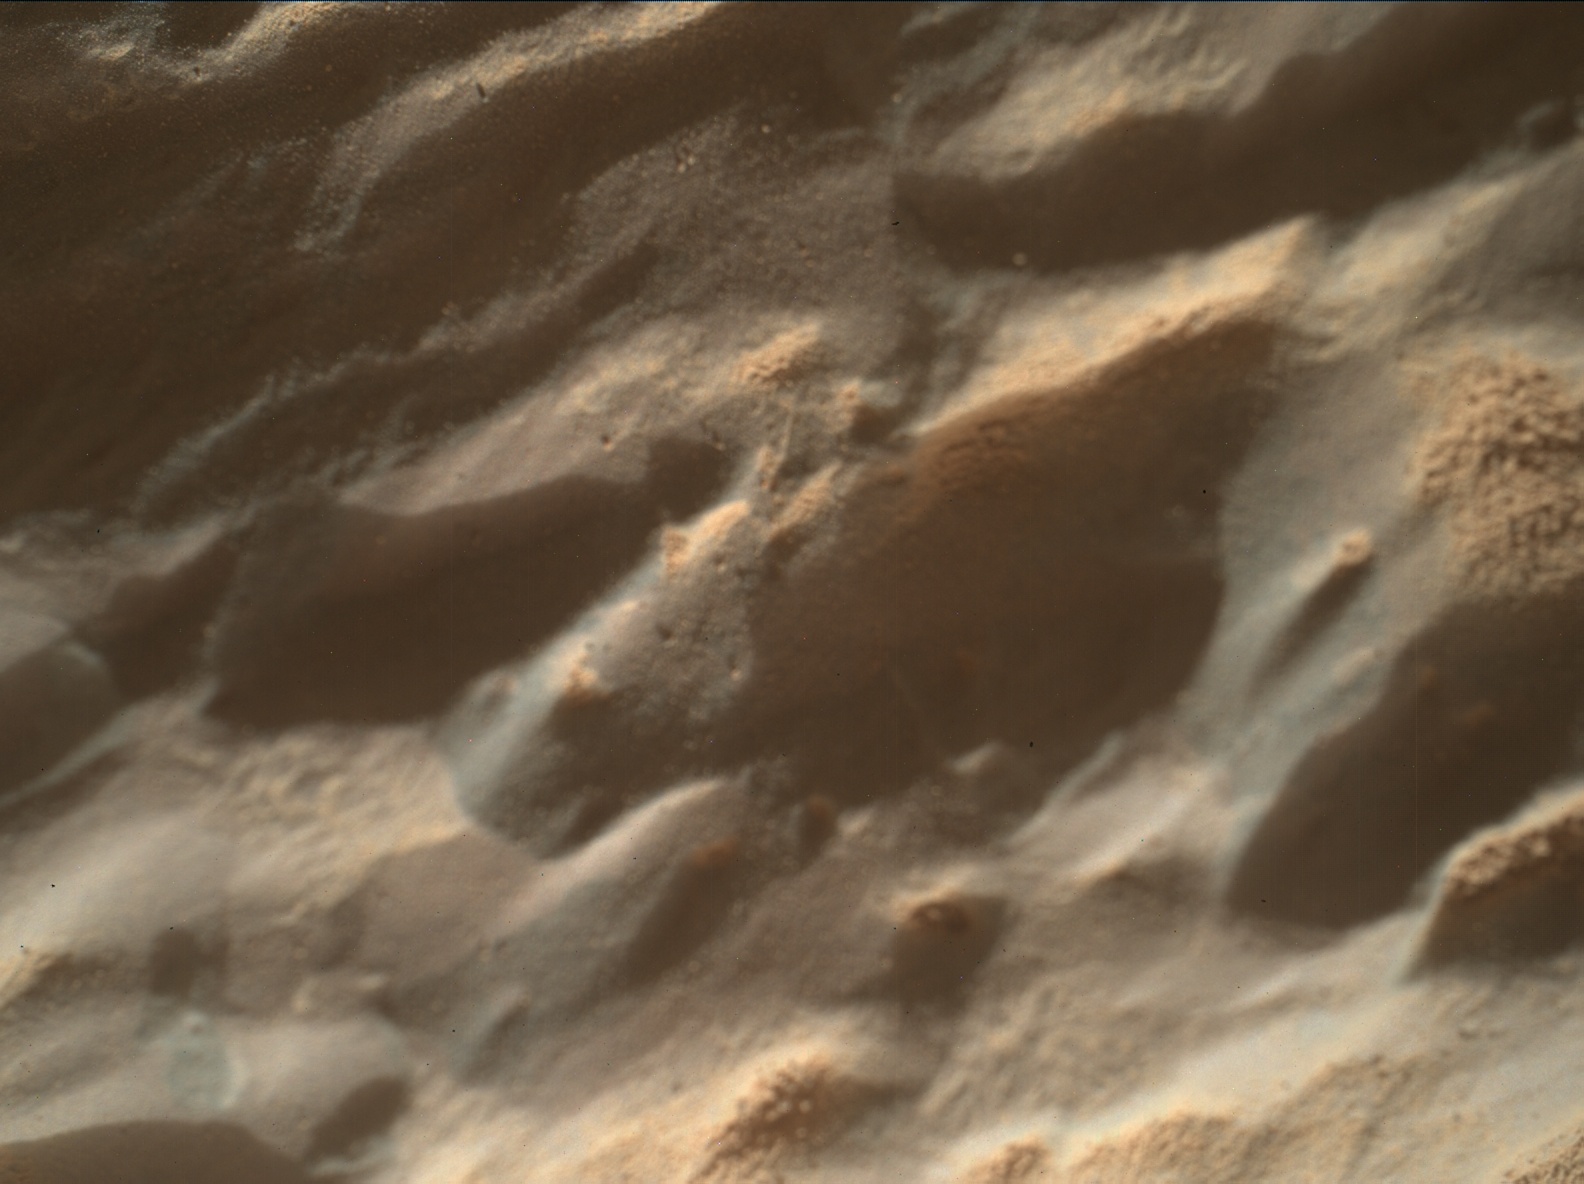 Nasa's Mars rover Curiosity acquired this image using its Mars Hand Lens Imager (MAHLI) on Sol 3732